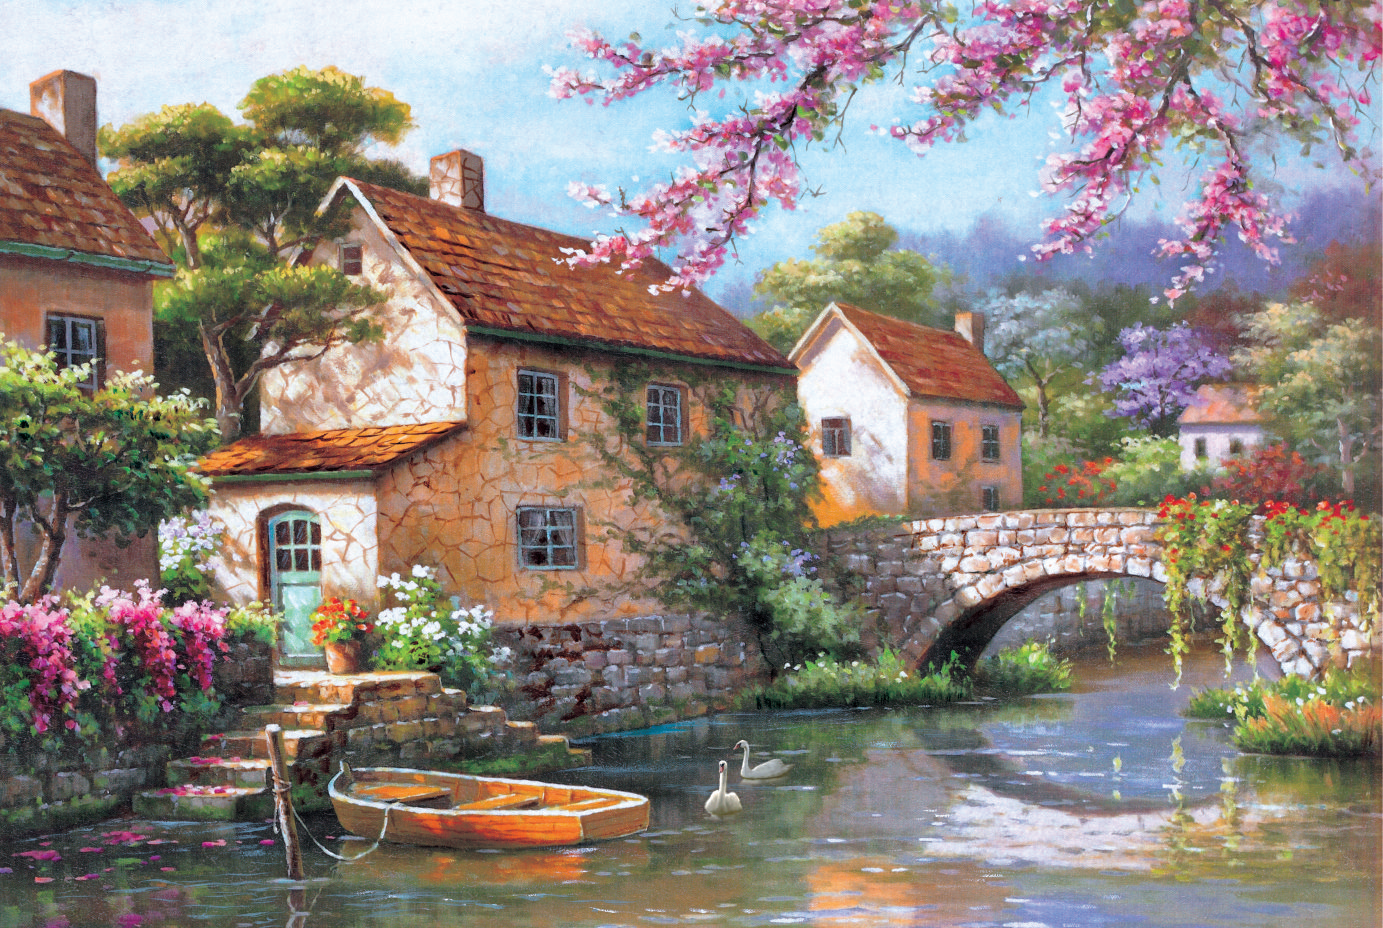 Adult Hot Sale Custom latest Design 1000 Pieces Jigsaw Puzzle Production in China